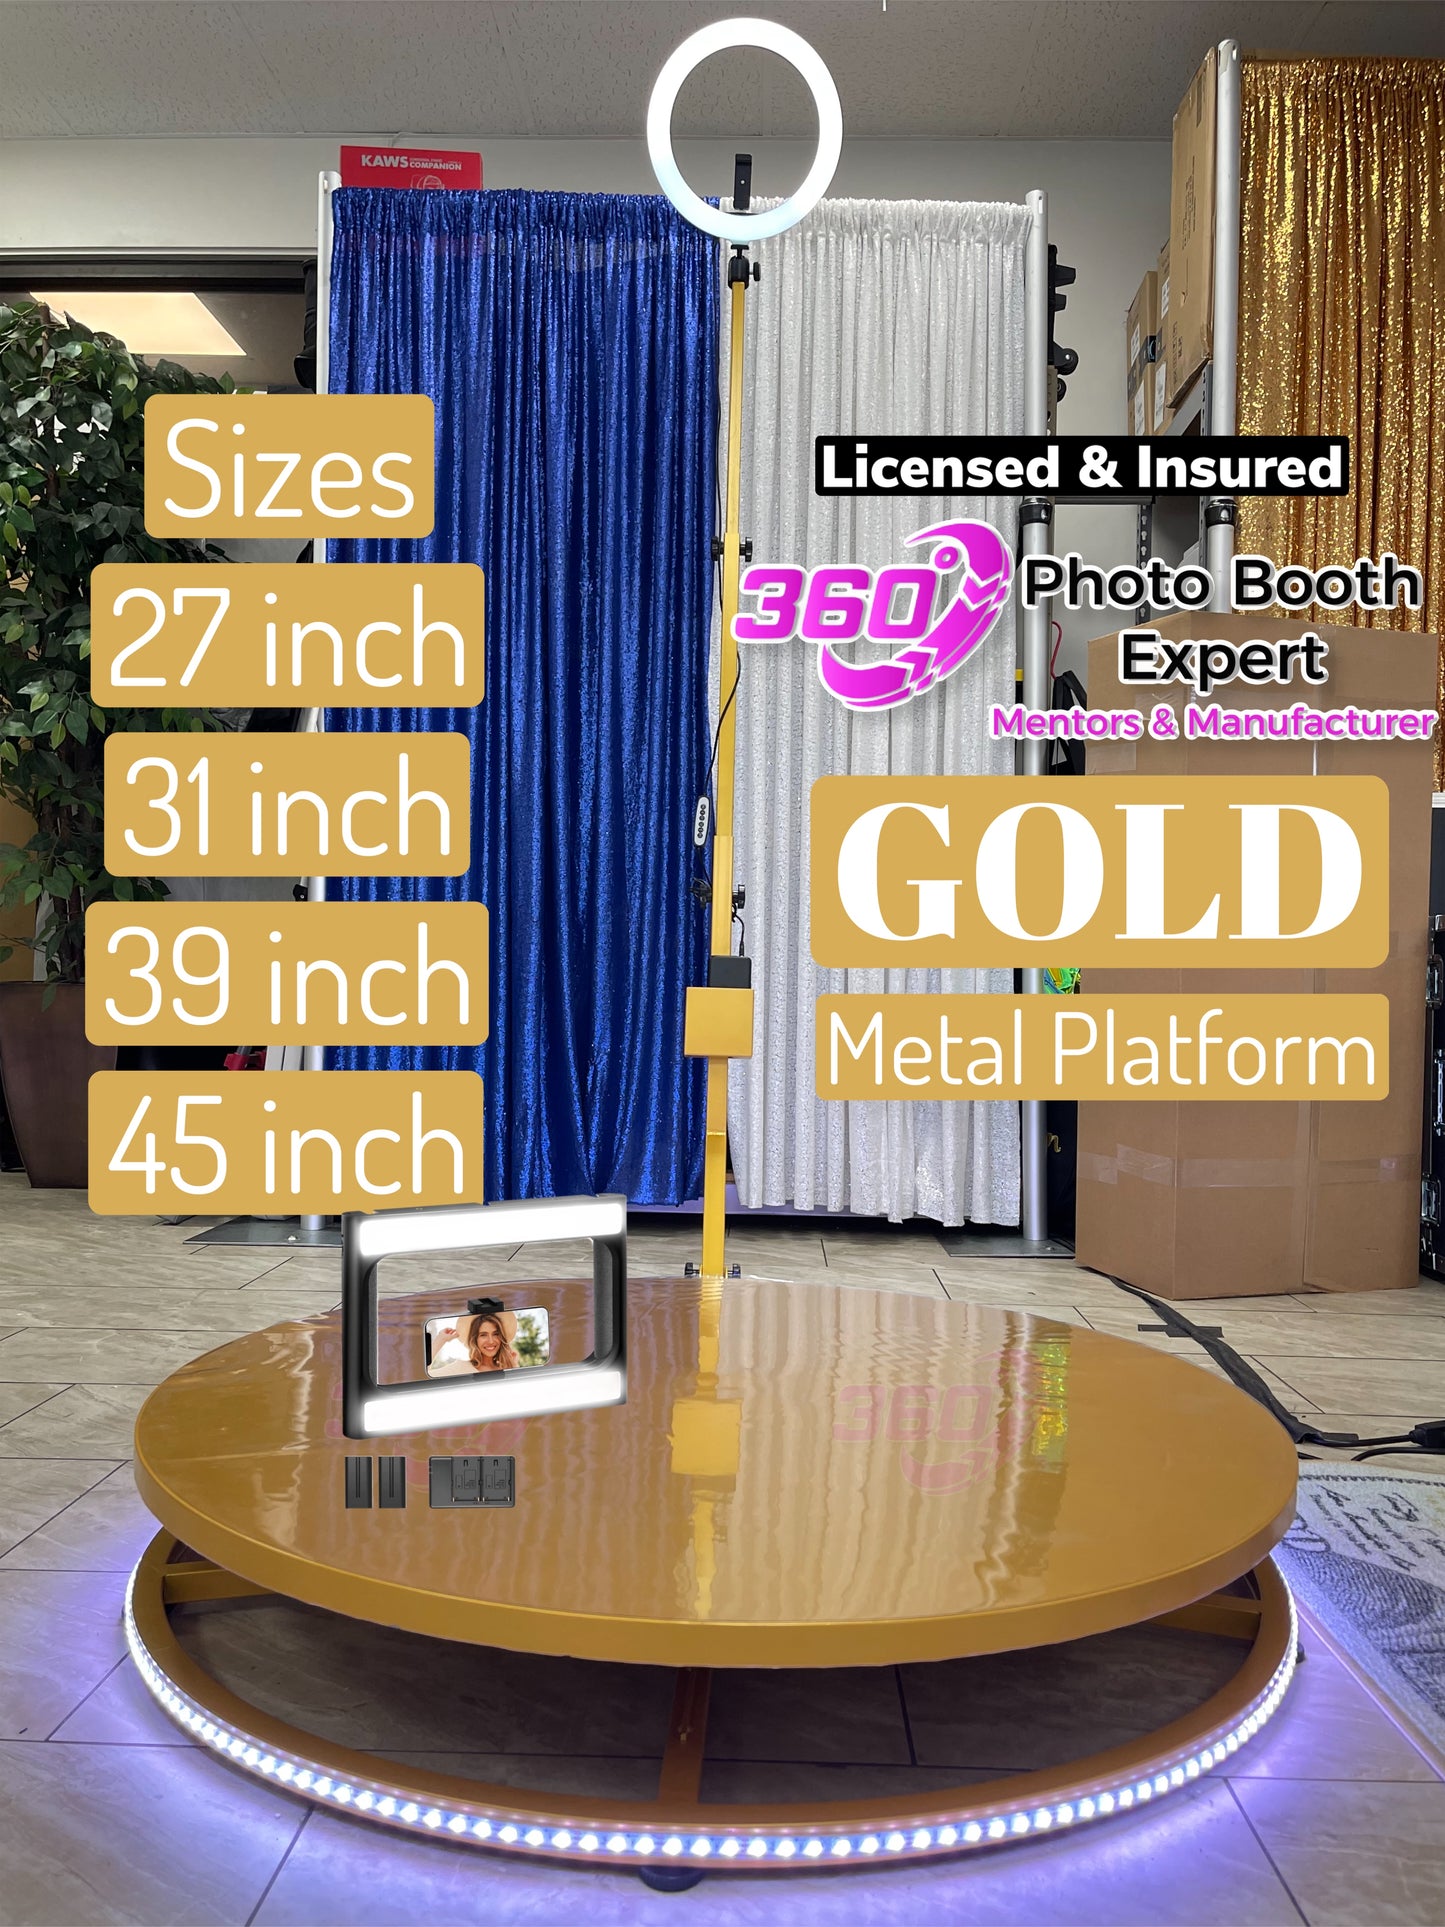 Gold 360 Video Booth